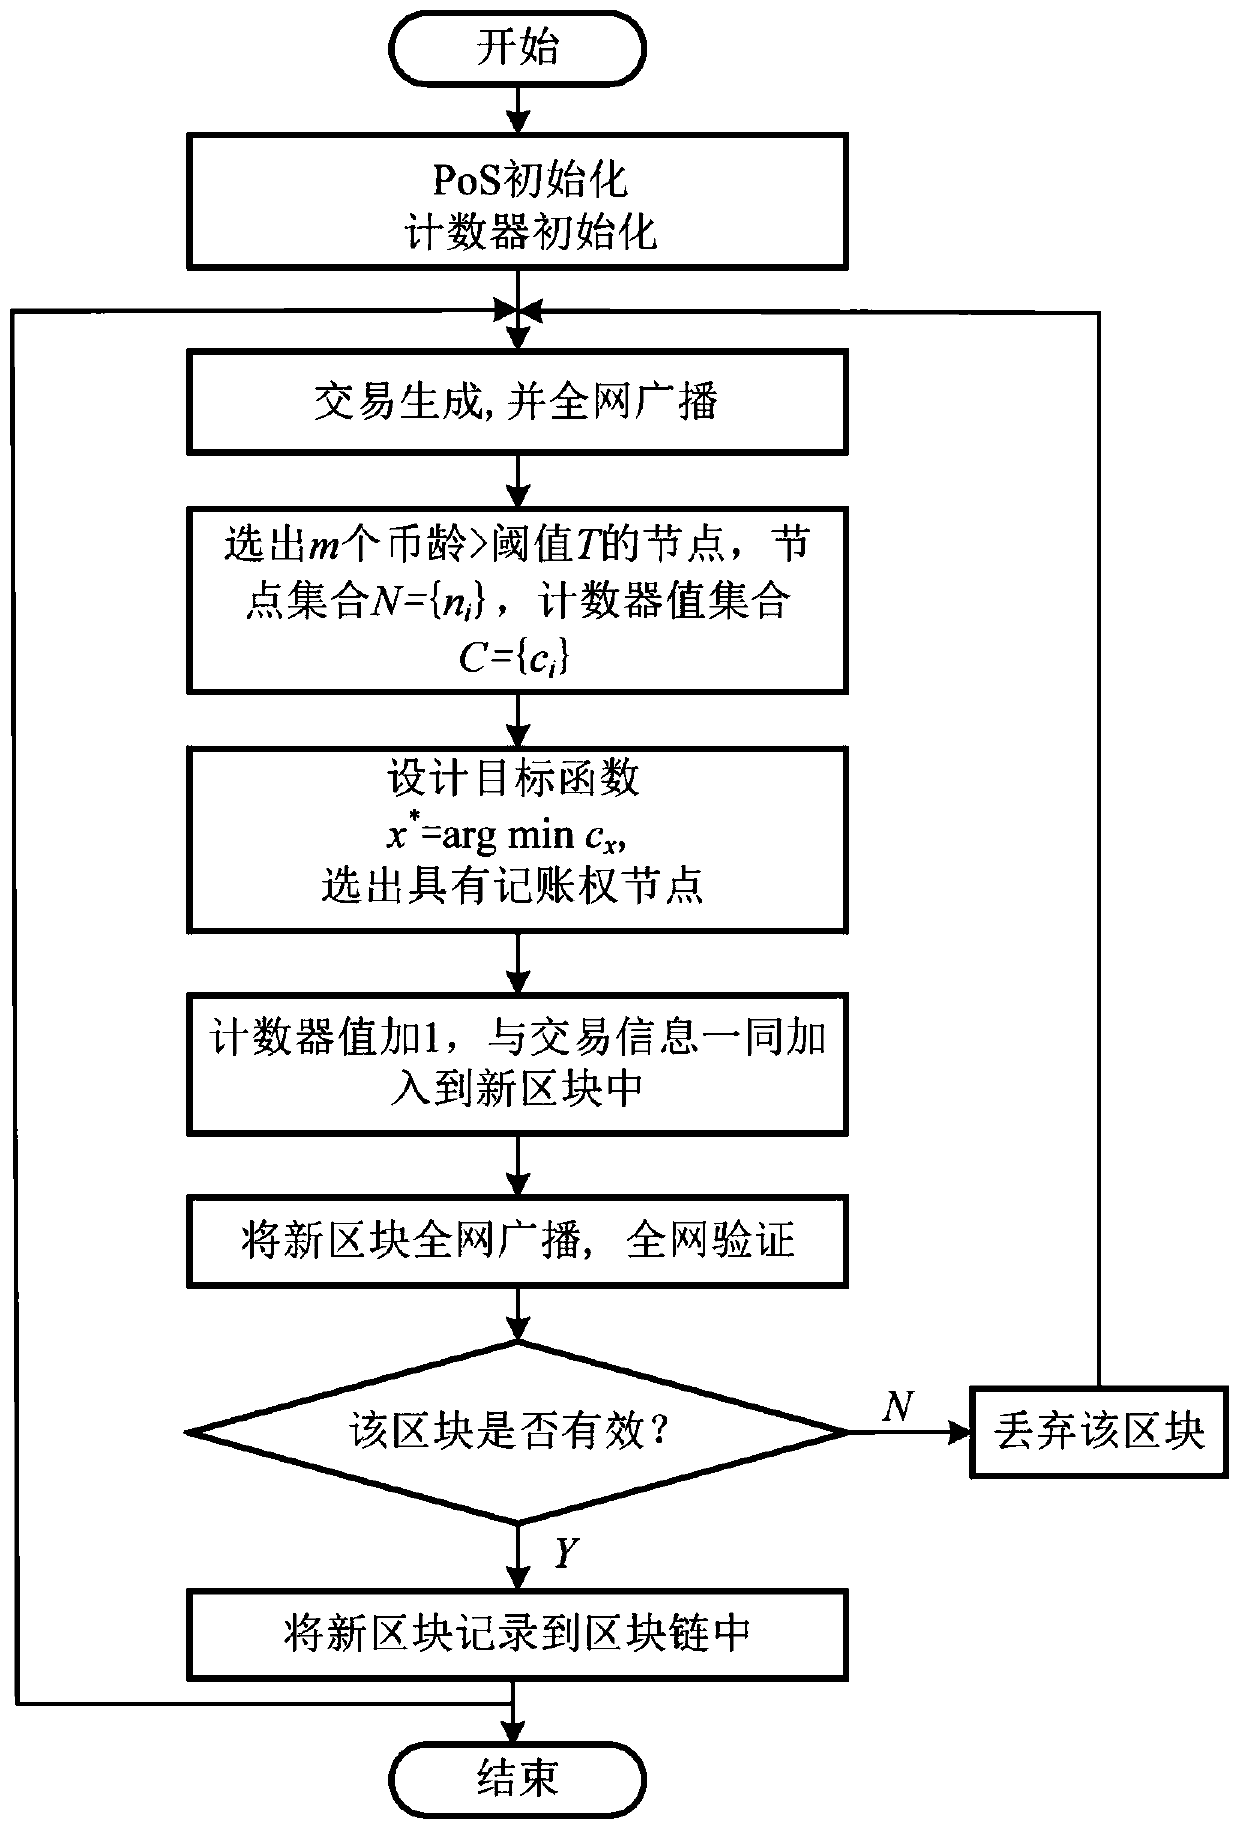 Consensus mechanism implementation method for relieving accounting right centralization under PoS mechanism